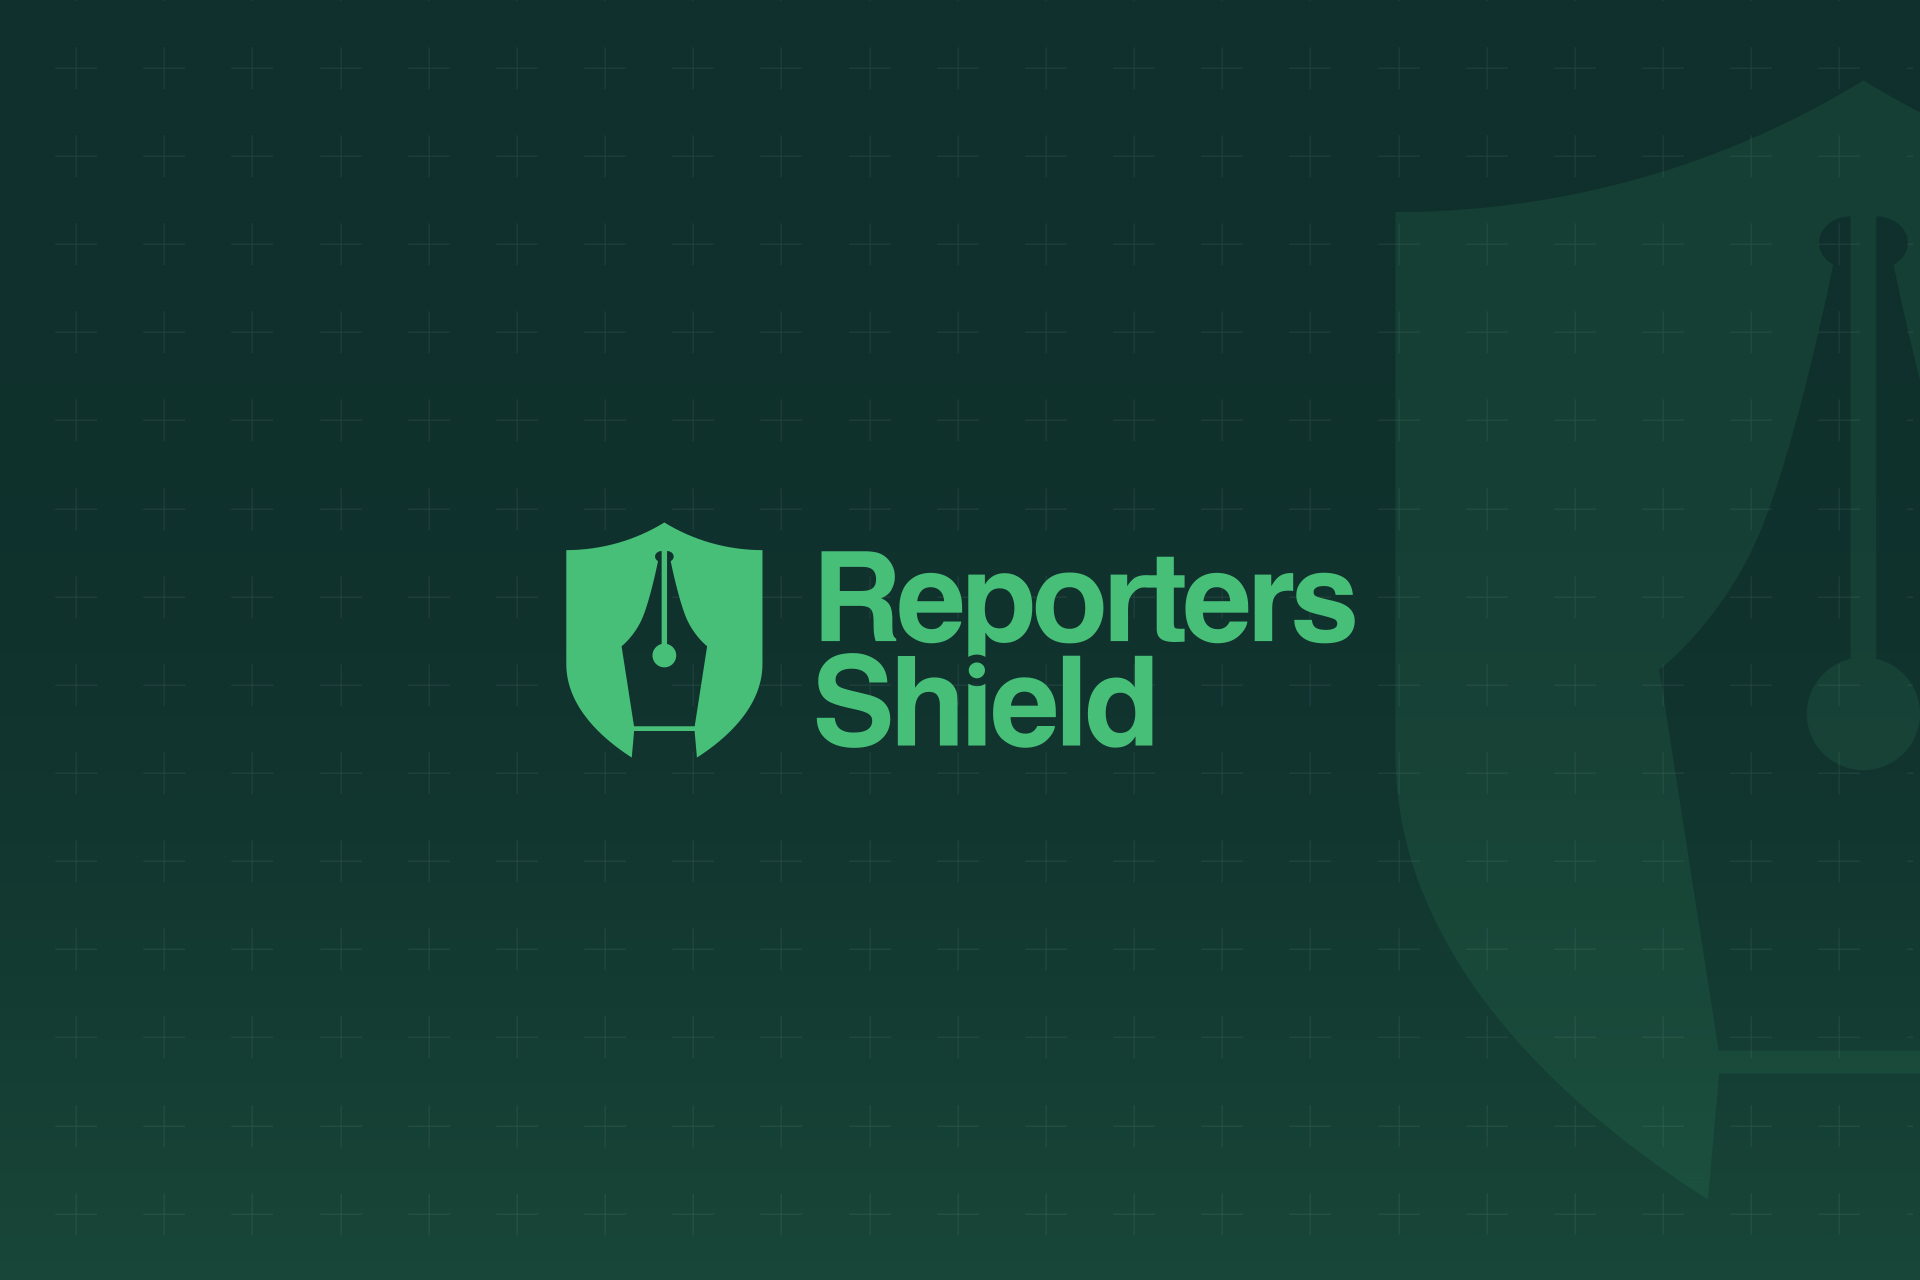 “Reporters Shield” Launches on World Press Freedom Day